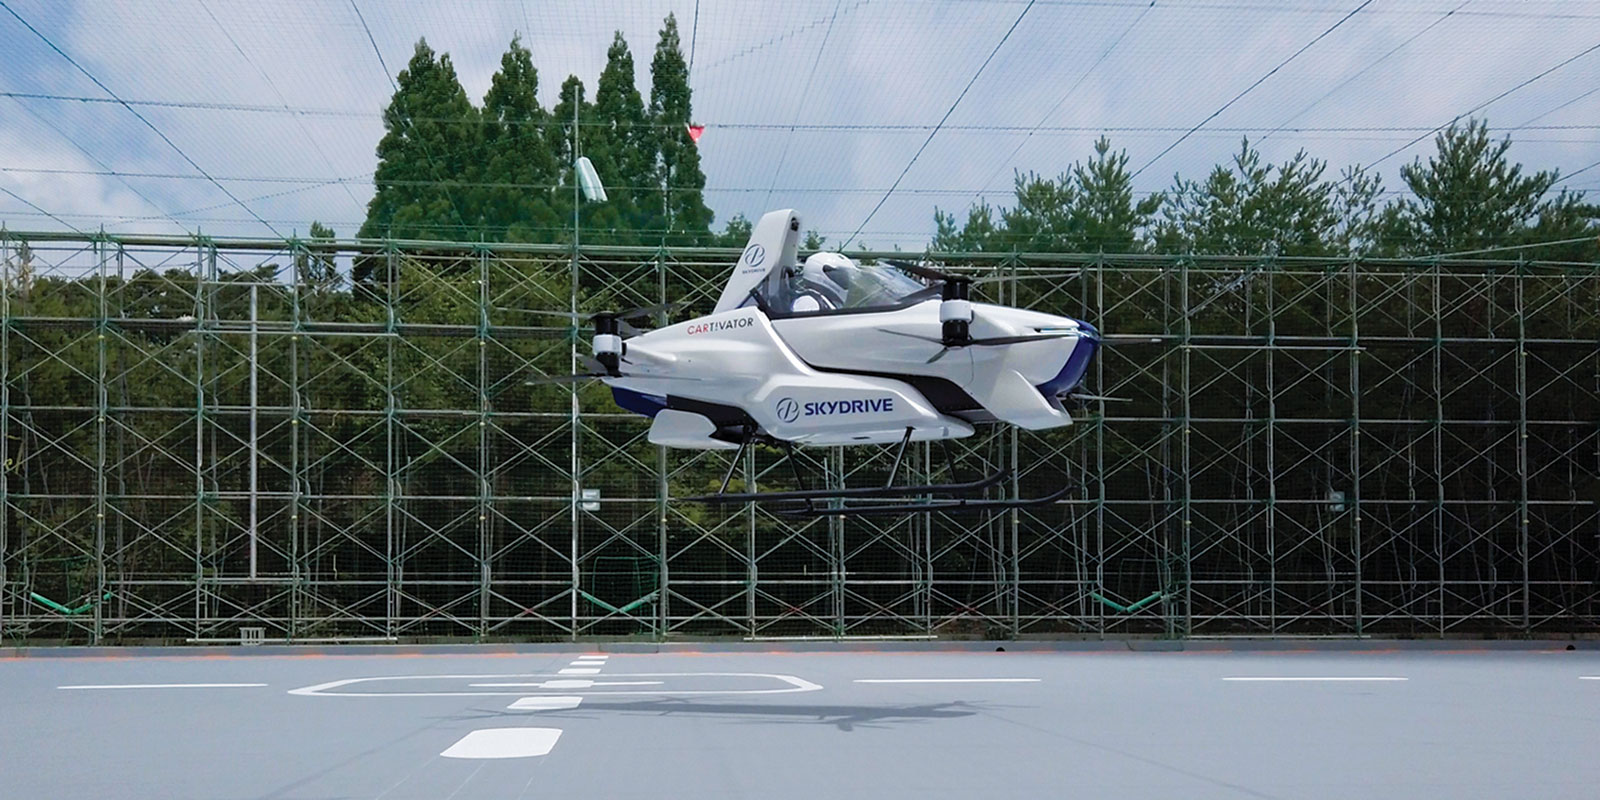 SkyDrive’s SD-03 prototype made its world debut on 25th August 2020 | ©SkyDrive